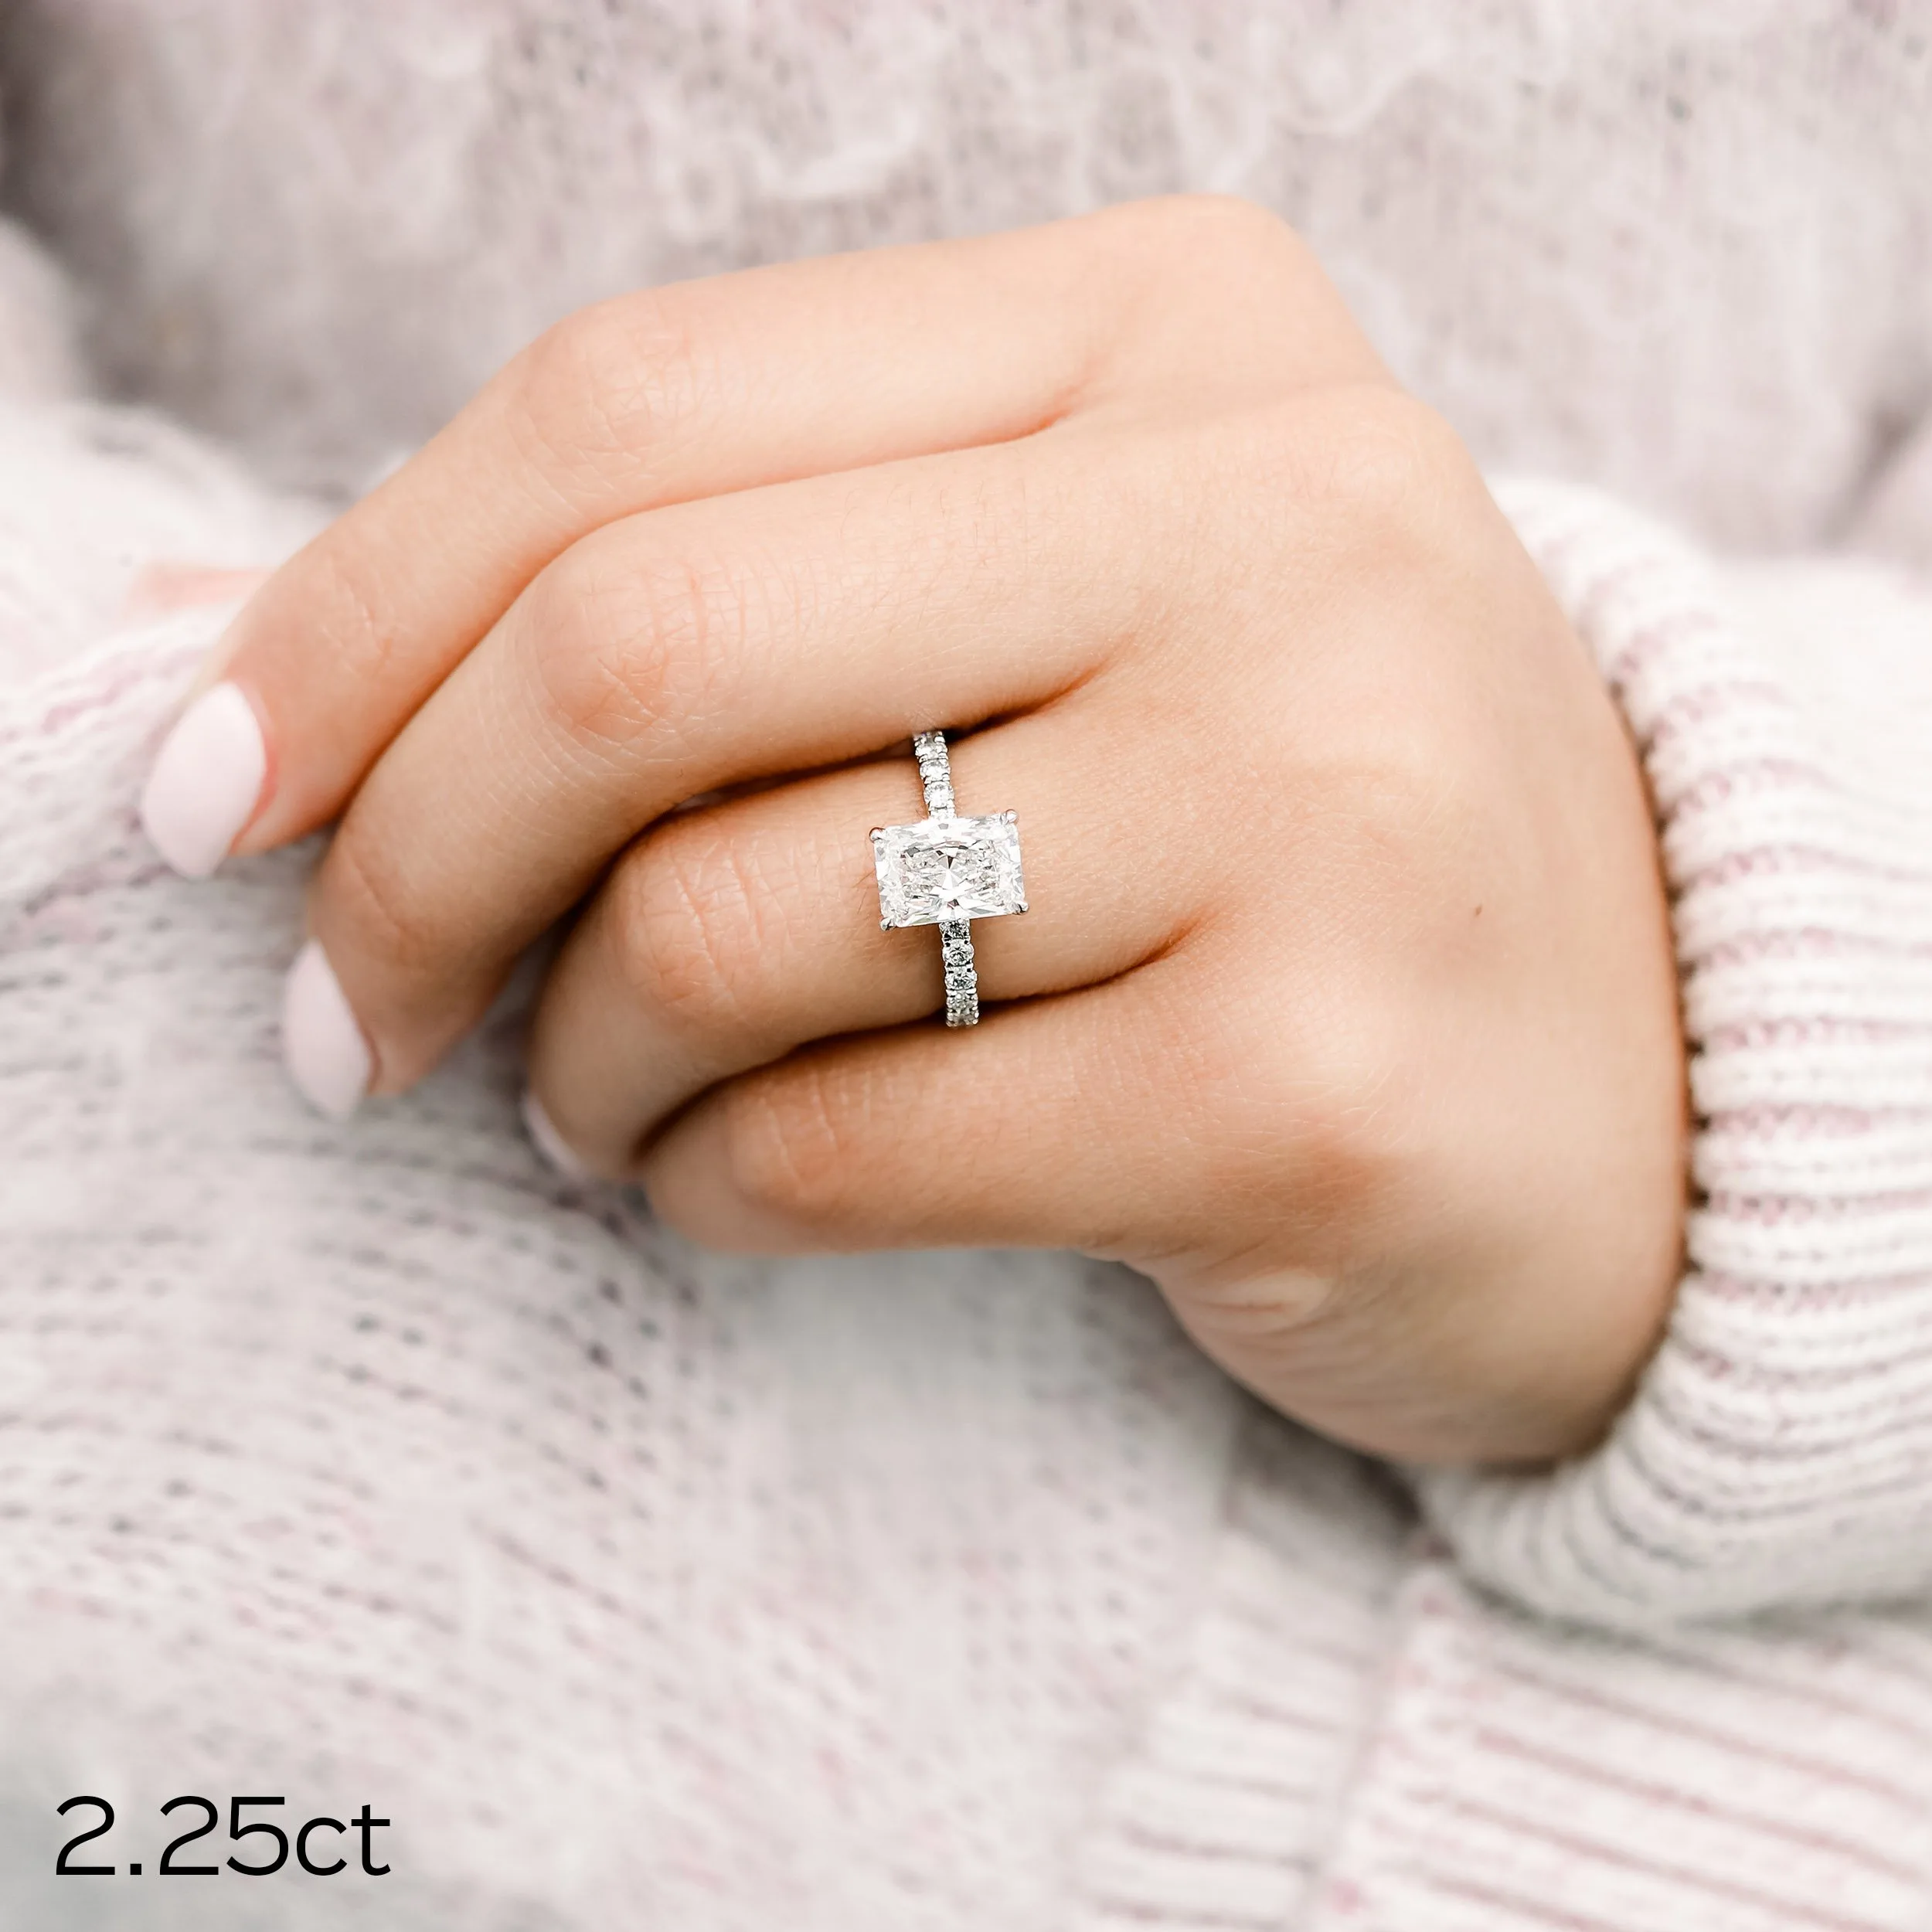 2.25ct lab created radiant cut diamond in classic pave setting